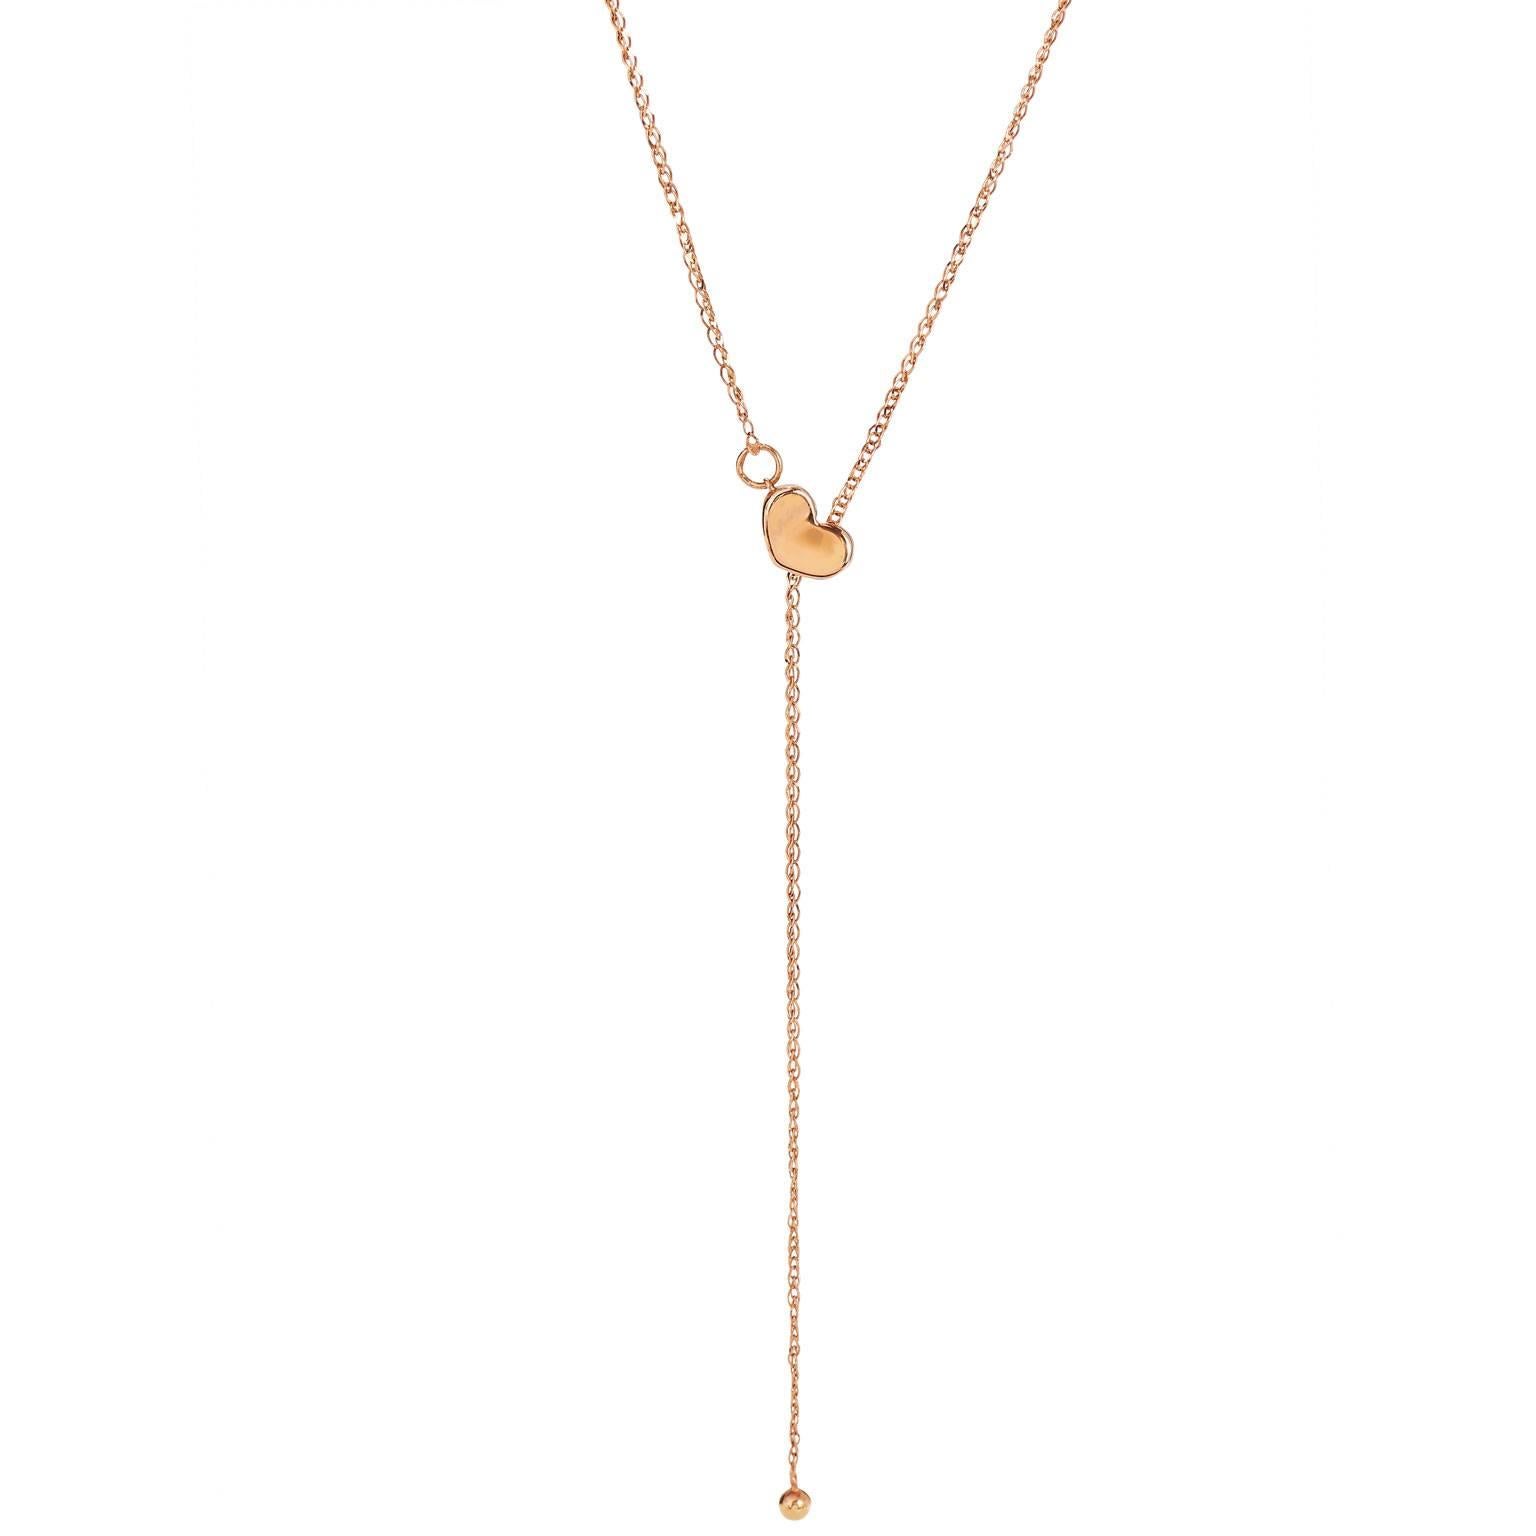 Enjoy this charming, previously loved 14 karat rose gold chain necklace featuring a heart-shaped slide clasp.